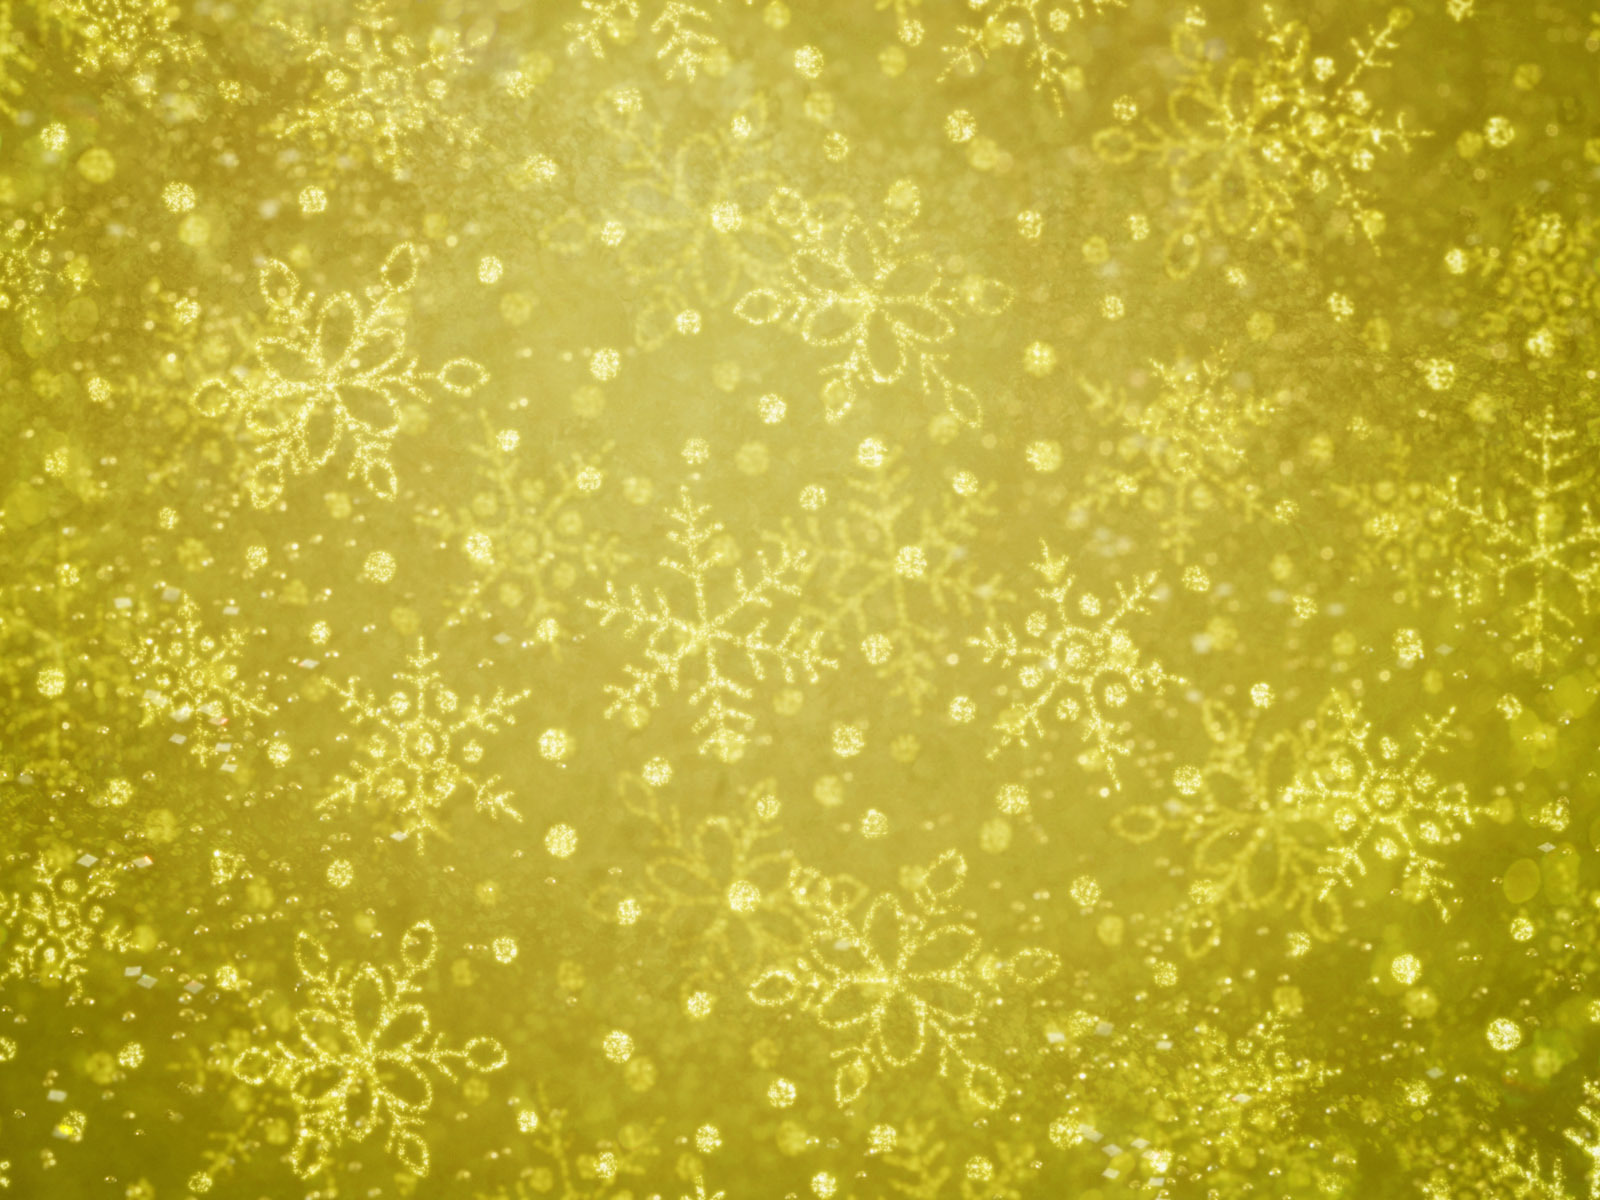 yellow, new year, holidays, background, christmas xmas, snowflakes cell phone wallpapers